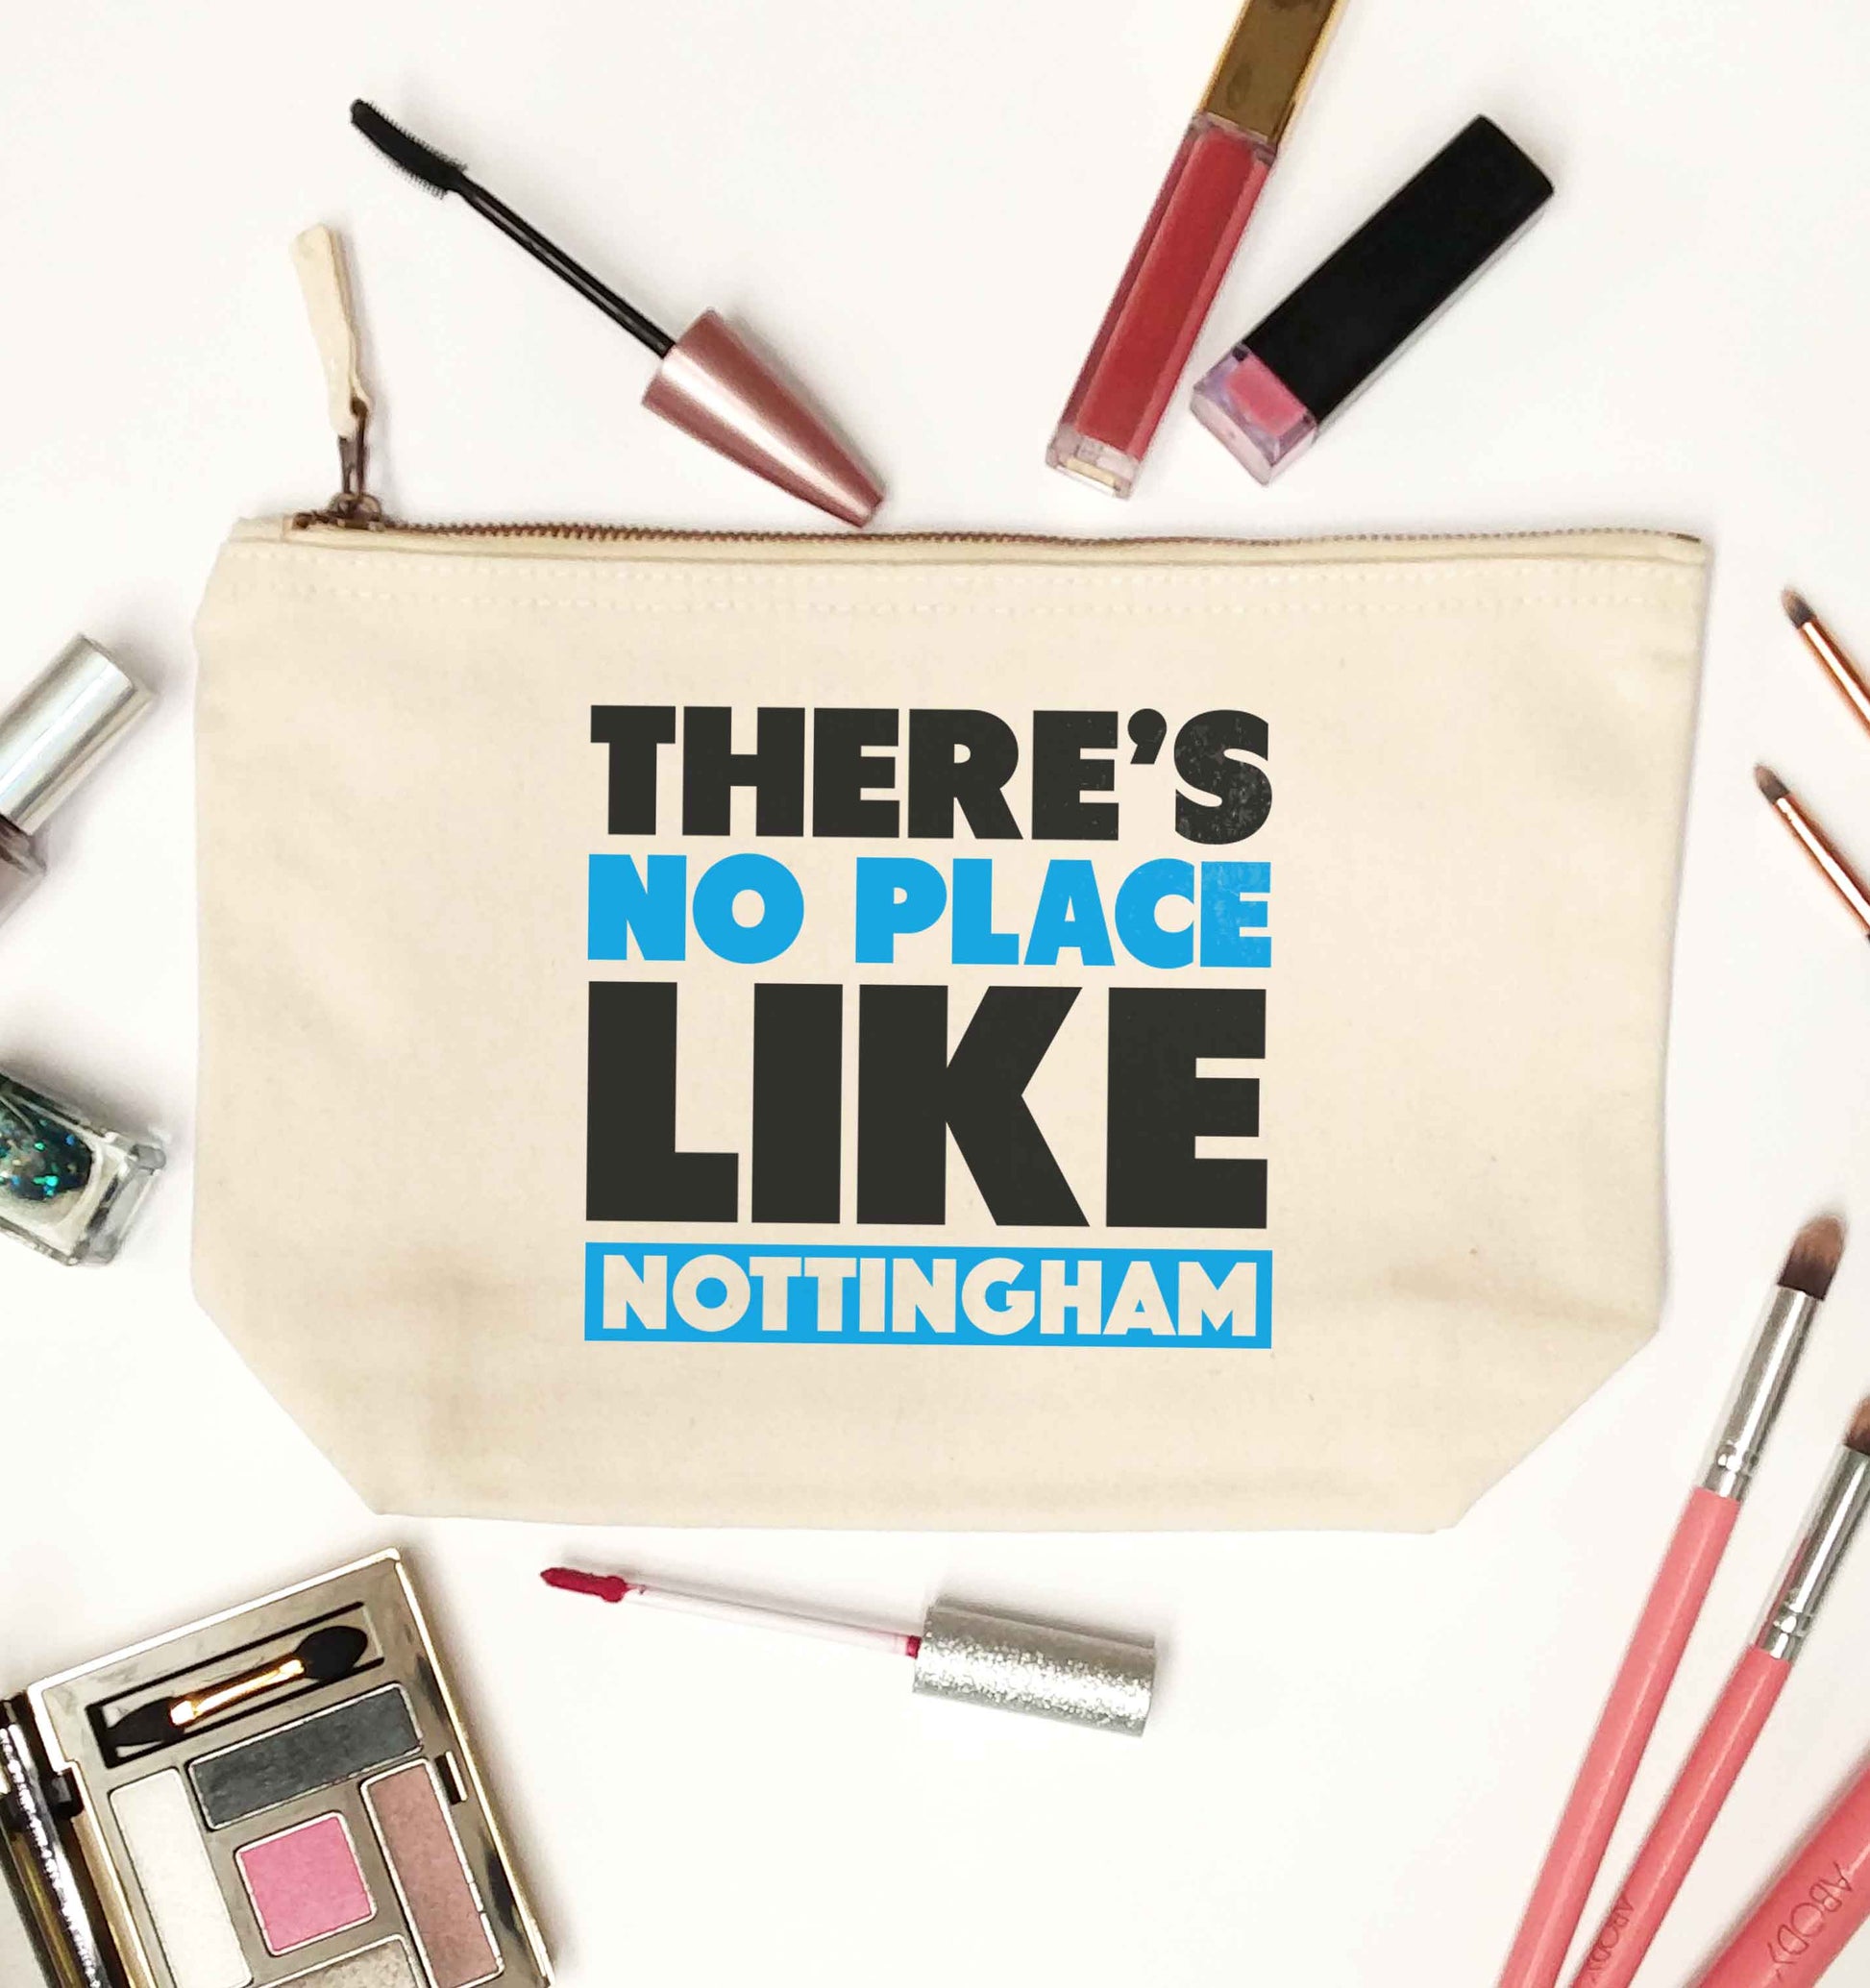 There's no place like Nottingham natural makeup bag